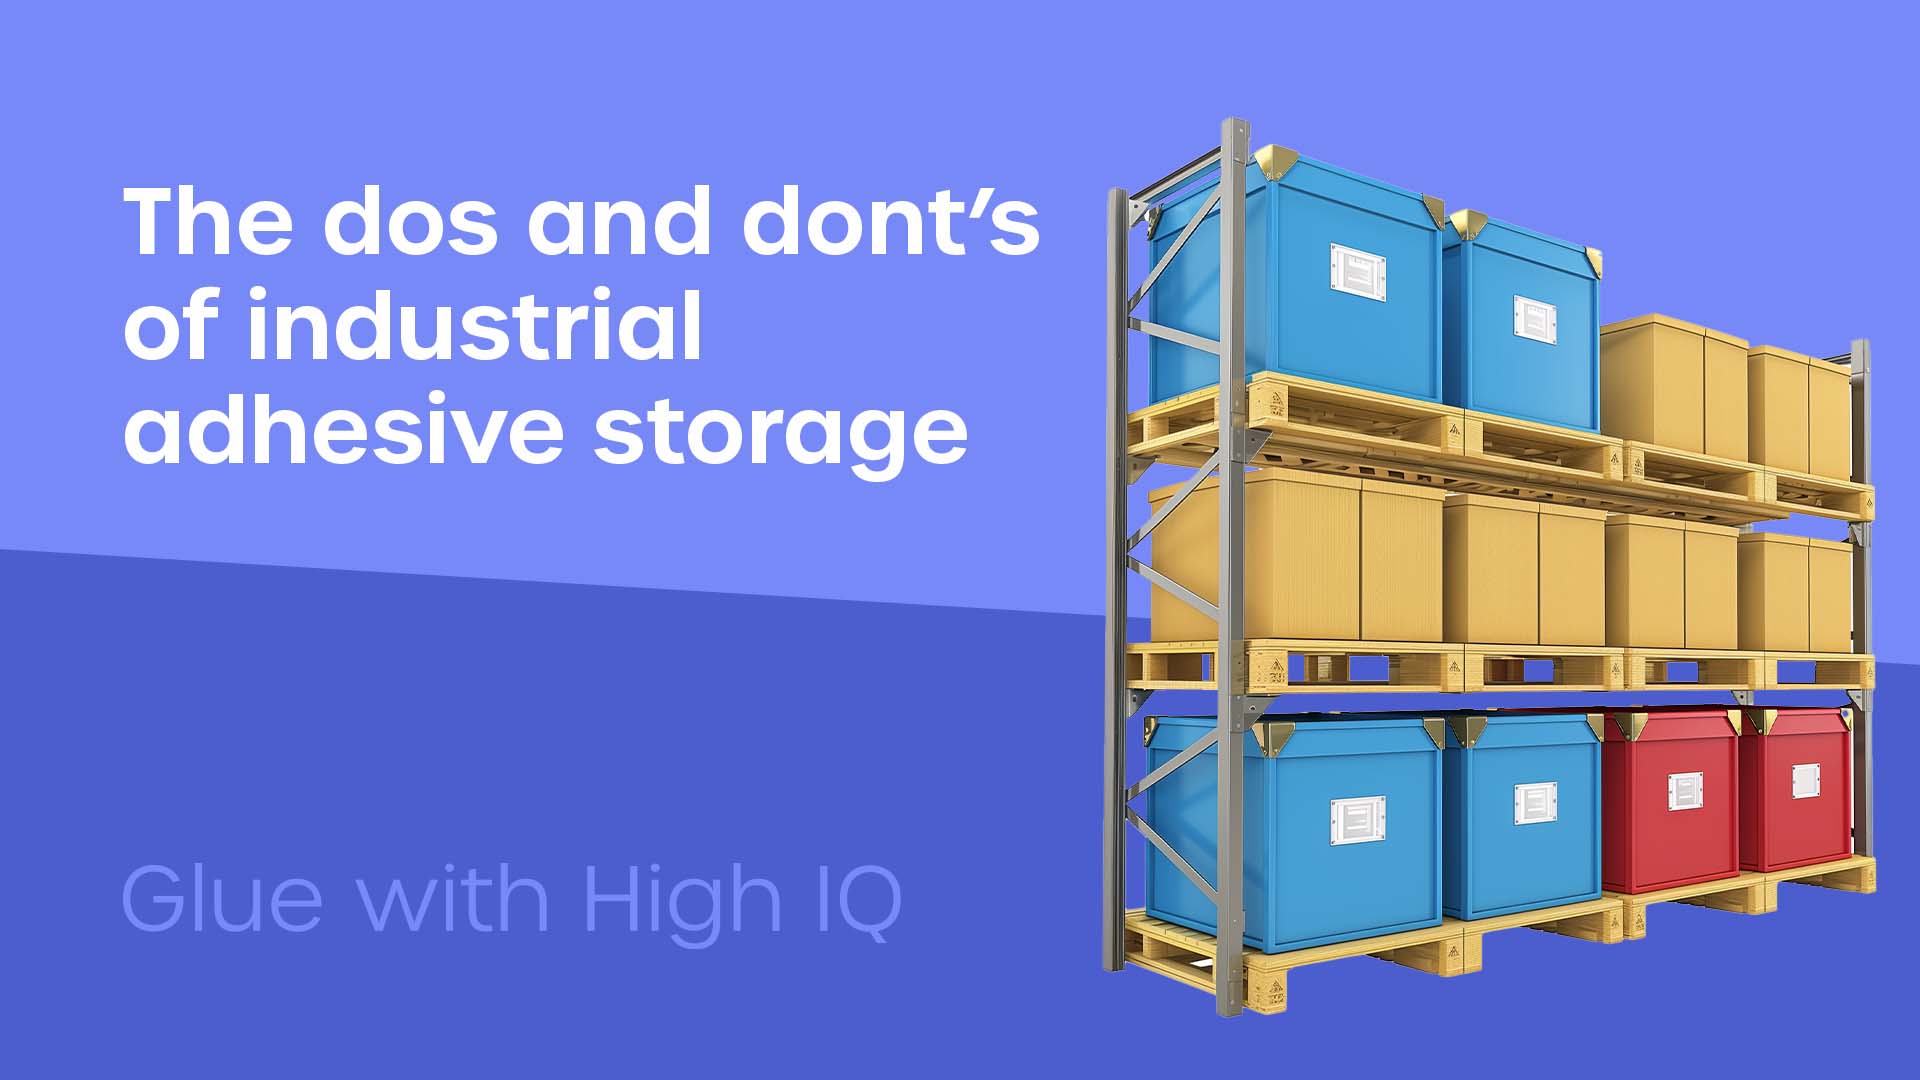 The dos and don’ts of industrial adhesive storage